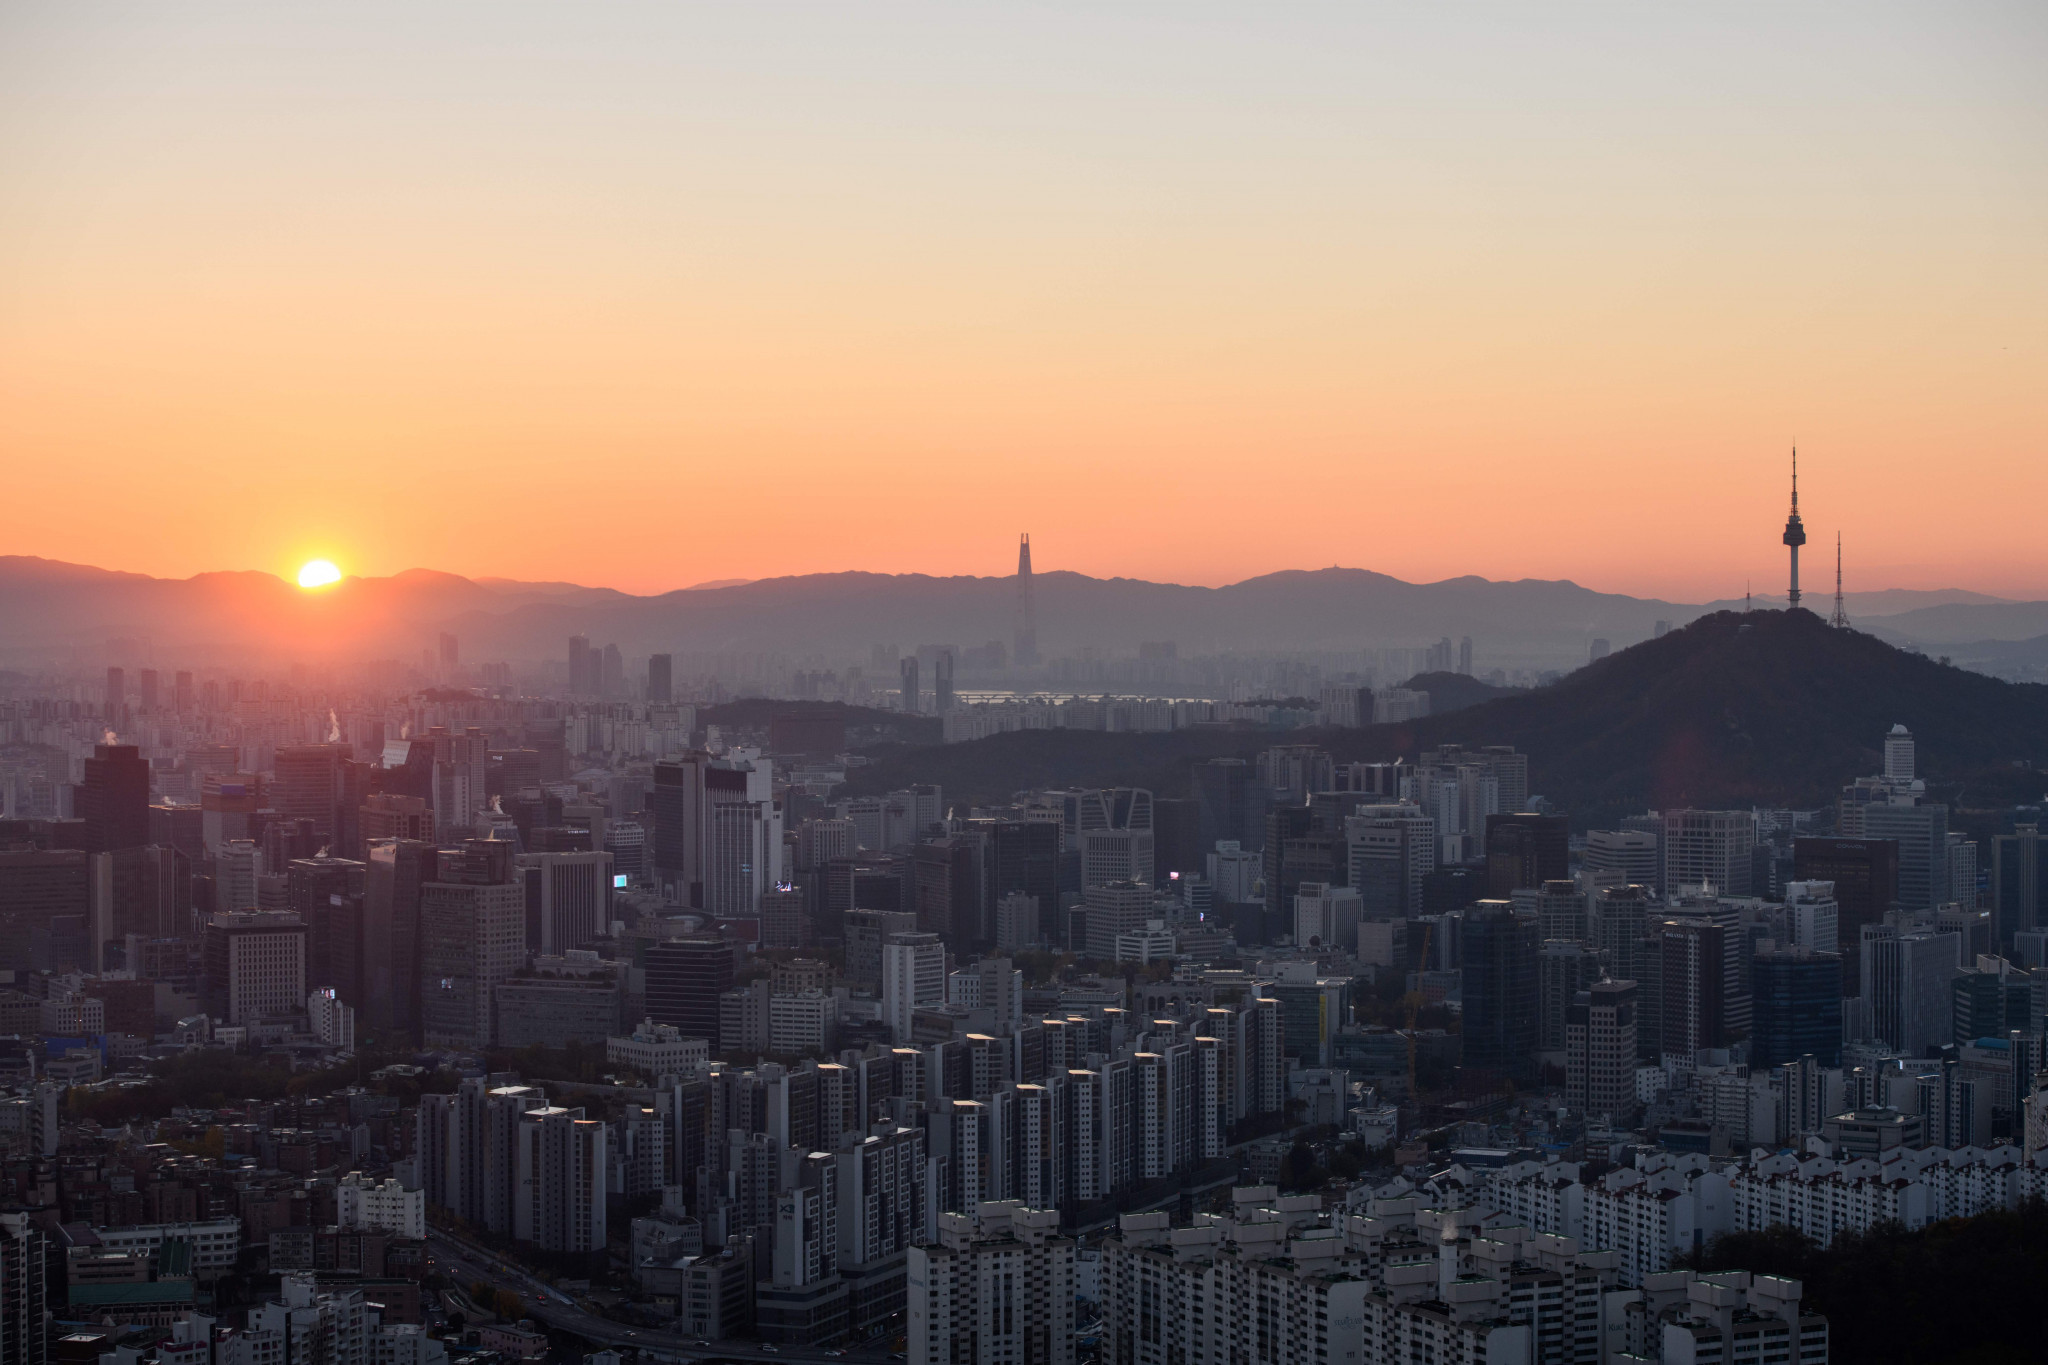 Seoul chosen as South Korean candidate city for joint Korean bid for 2032 Olympics and Paralympics